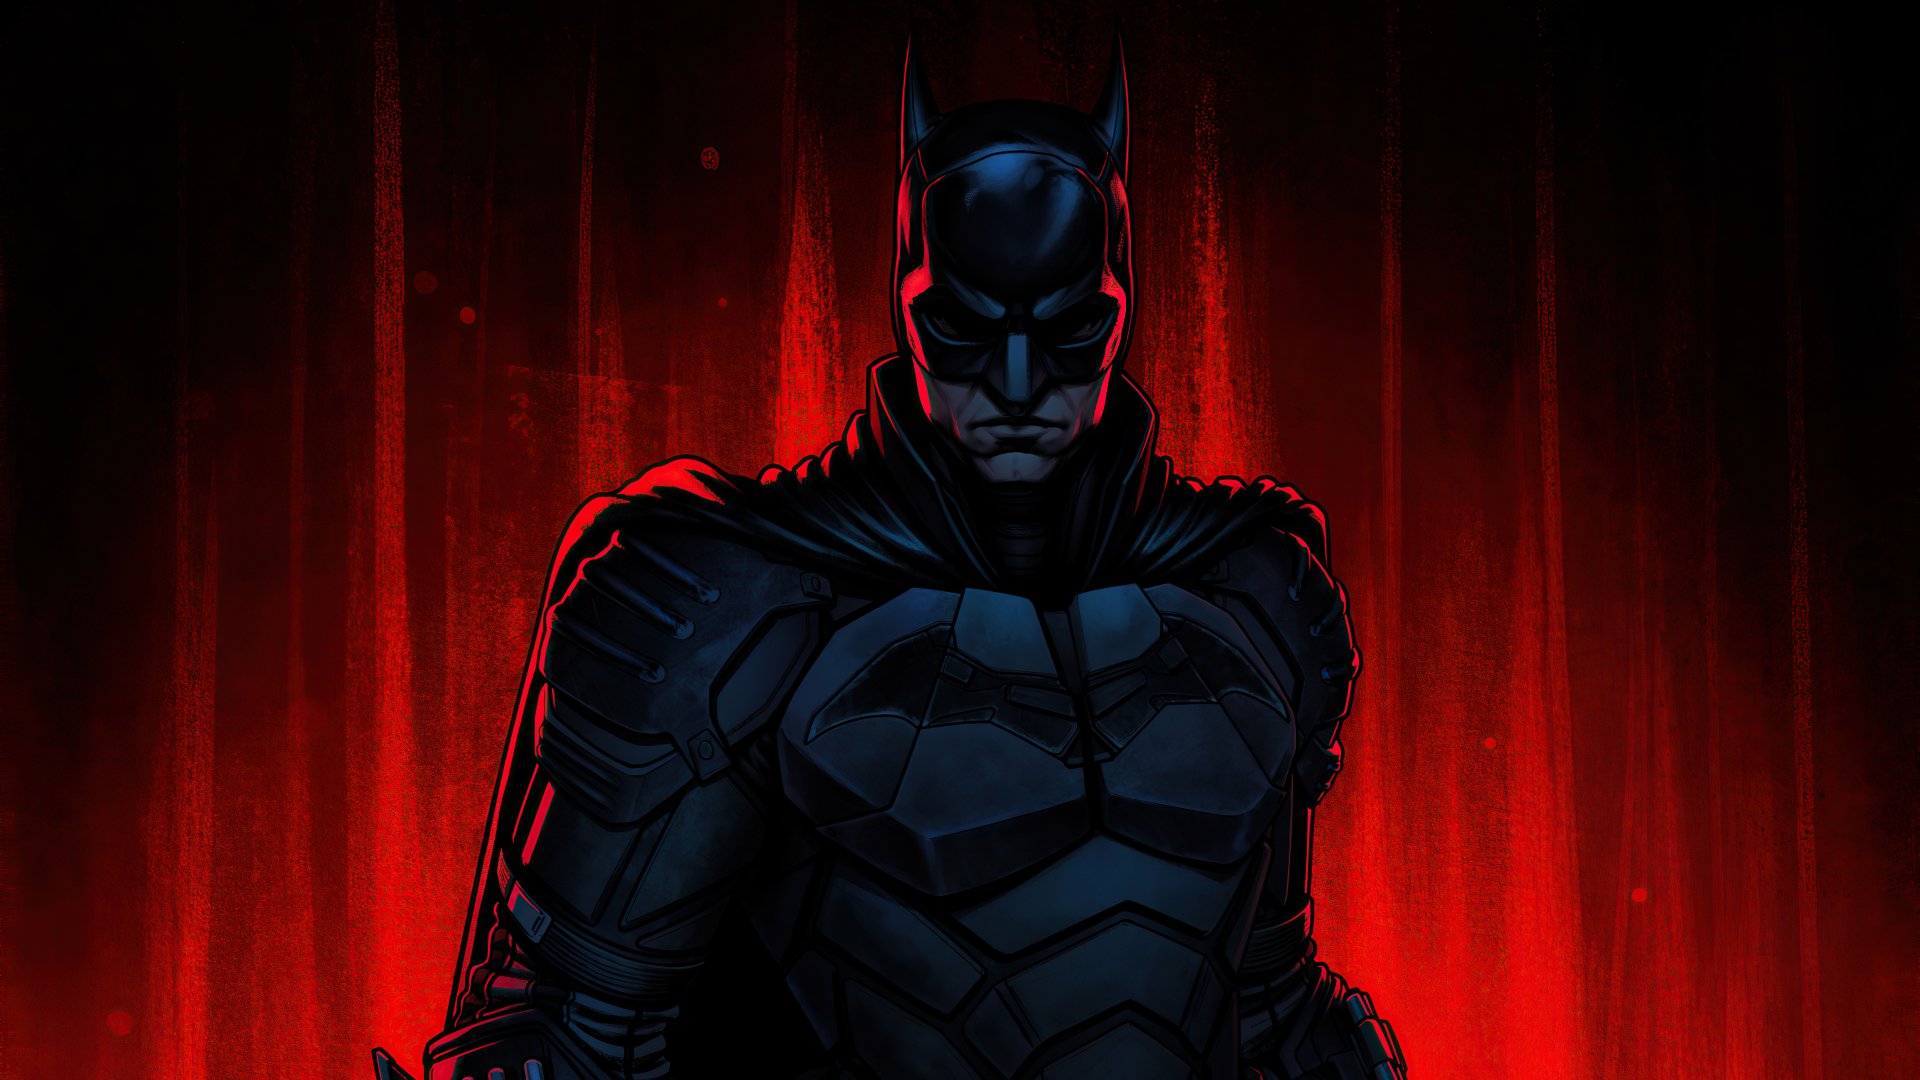 The Batman with red background Wallpaper 4k Ultra HD ID:6426